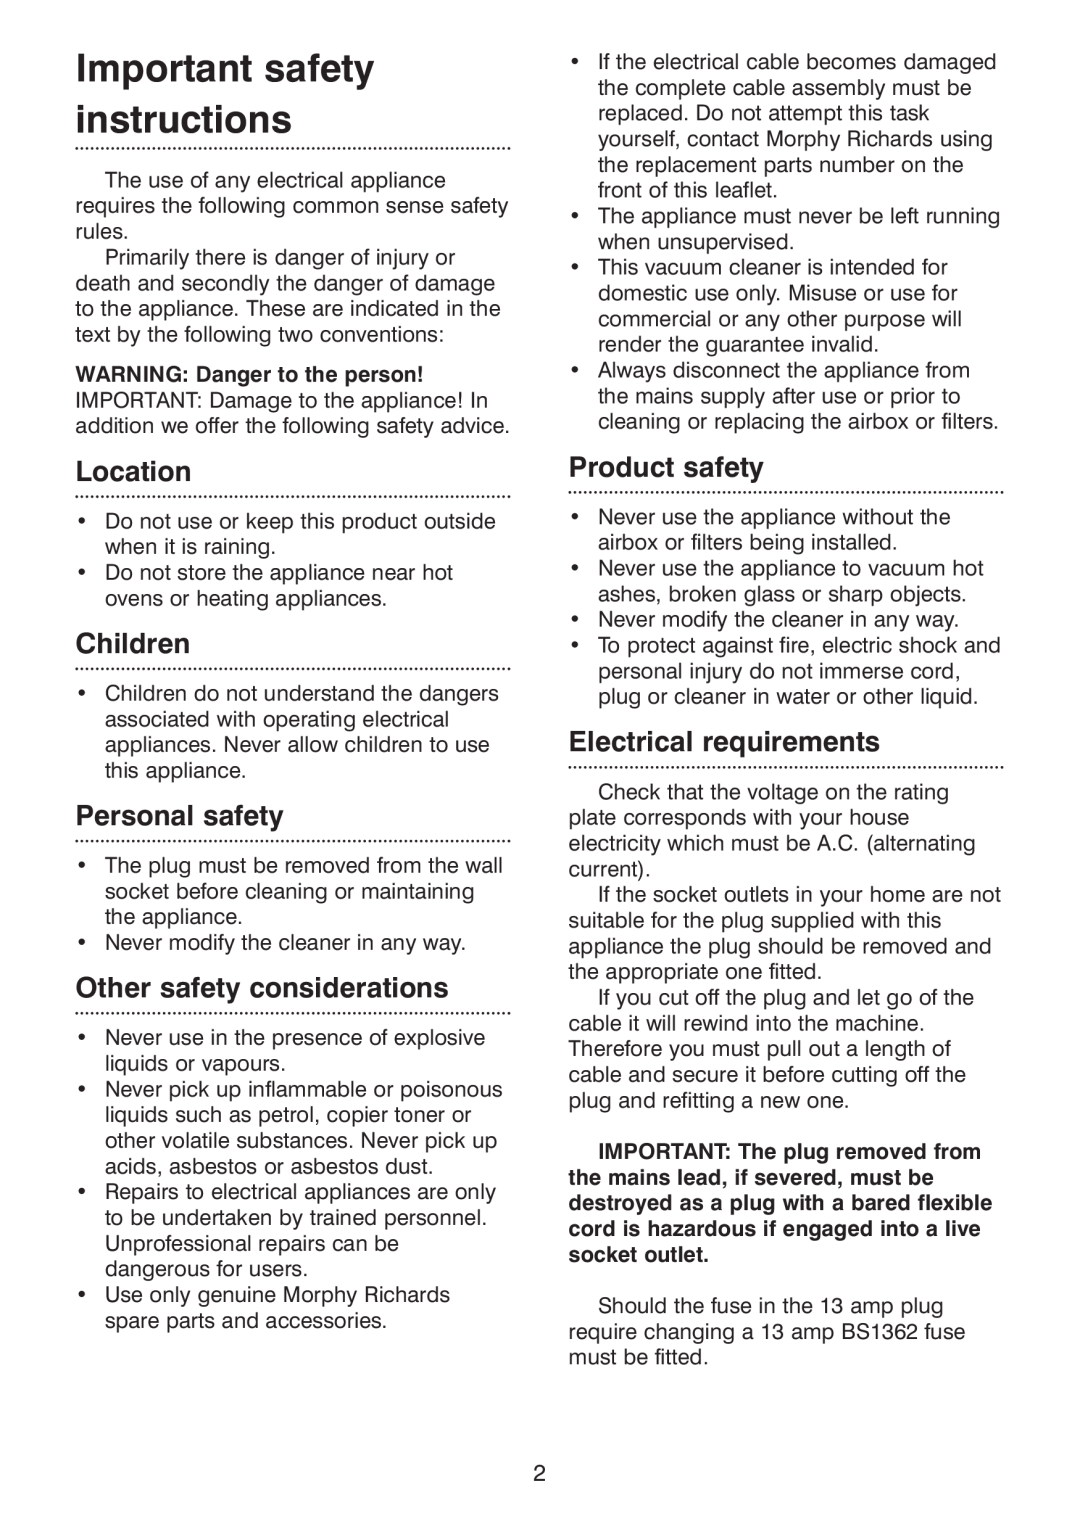 Morphy Richards Ecovac 70096 Rev 2 (Page 1) manual Important safety instructions, Location, Children, Personal safety 